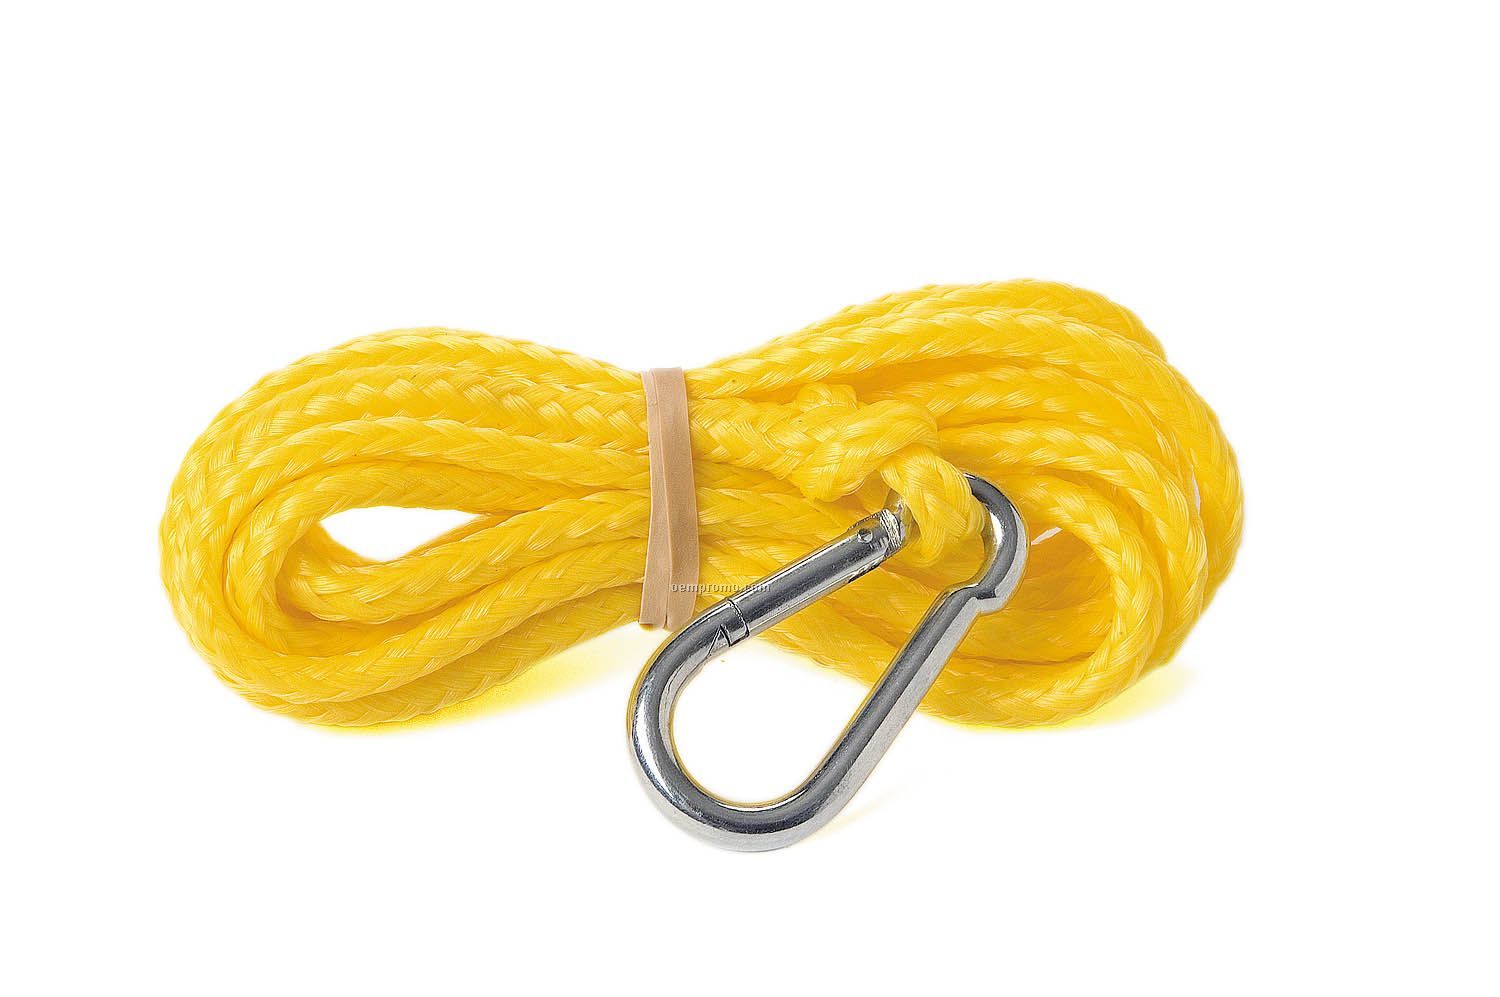 Rescue Rope (Blank Goods Only)